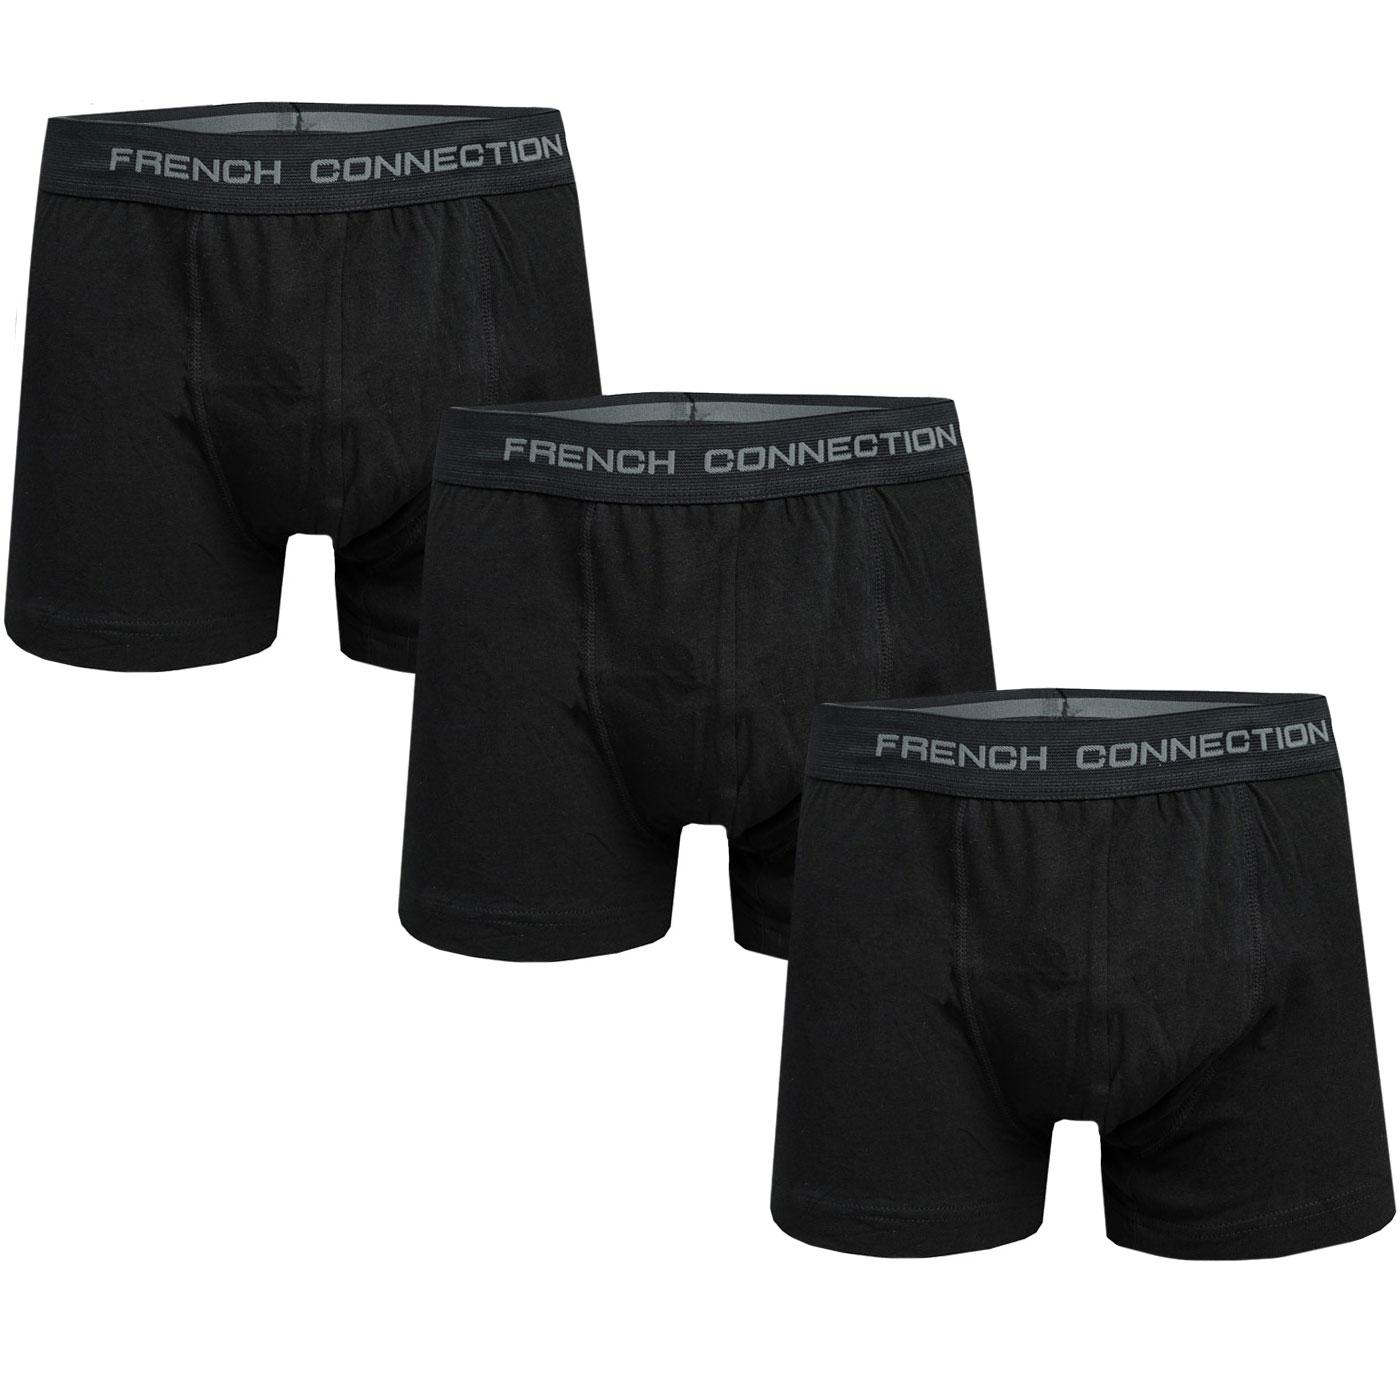 + FRENCH CONNECTION 3 Pack Boxer Shorts (Black)